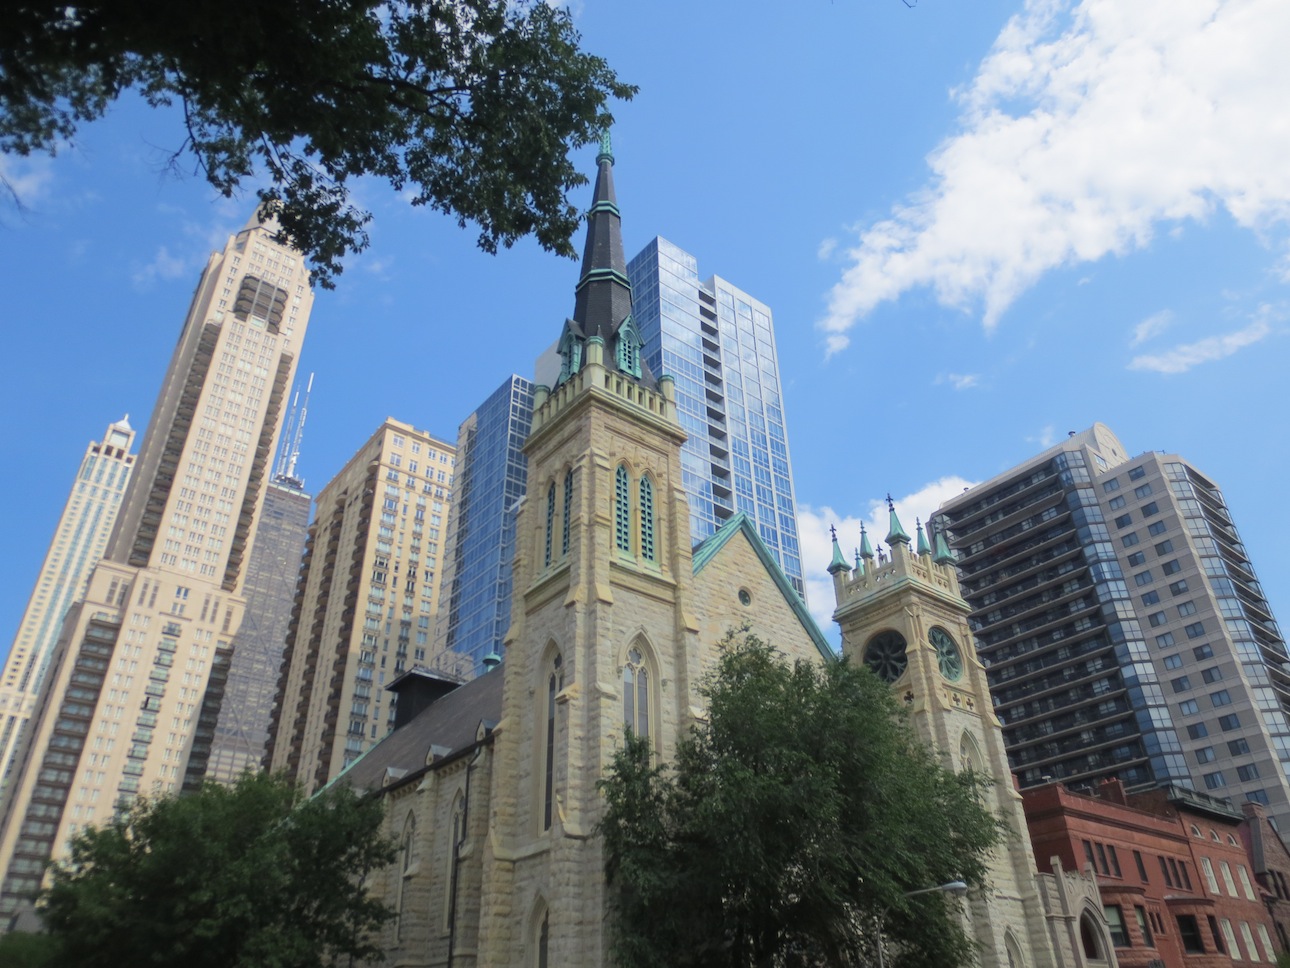 A church against the backdrop of skyscrapers.